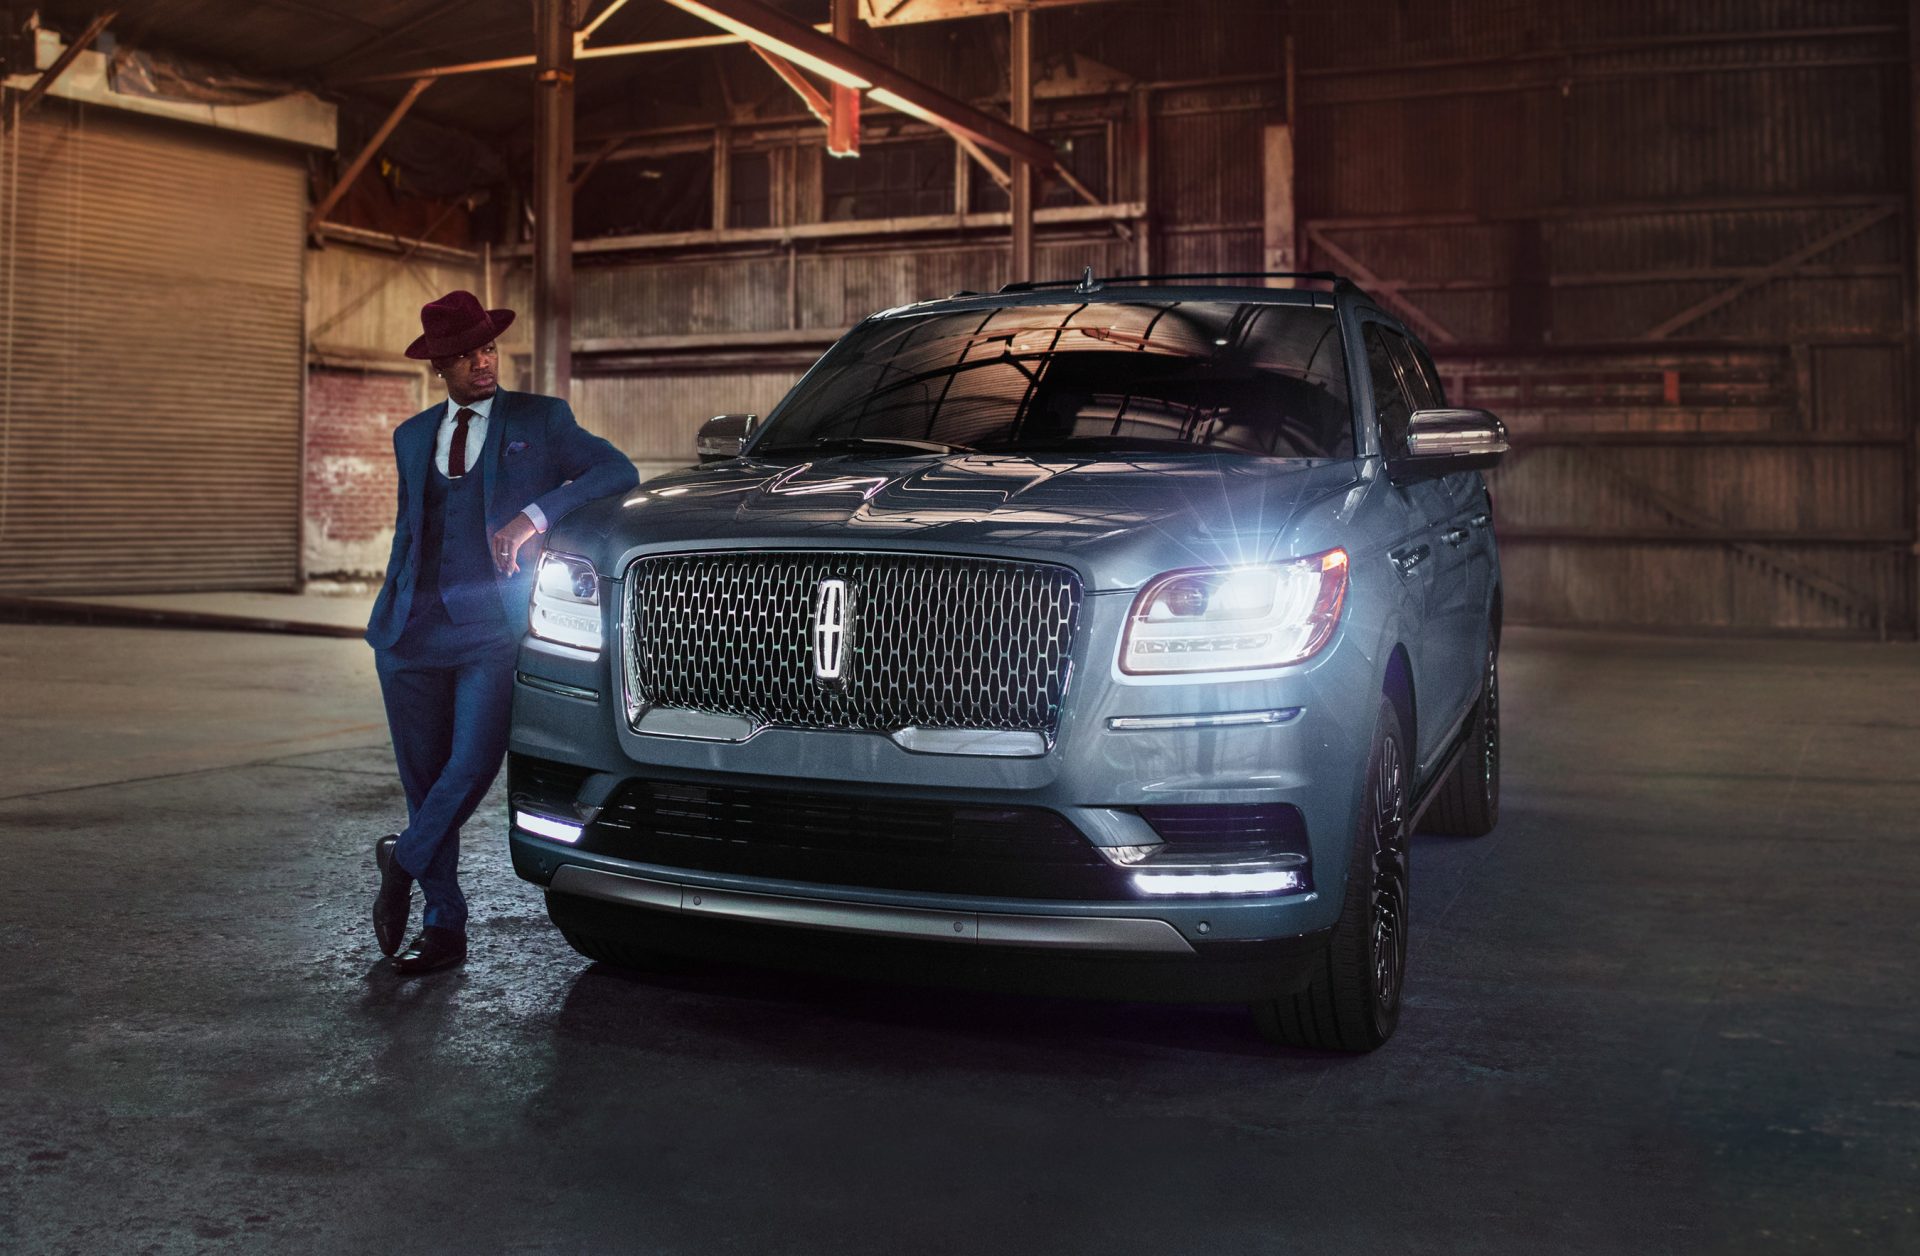 Lincoln First Listen volume six featuring NE-YO highlights the all-new 2018 Lincoln Navigator and Revel sound system.